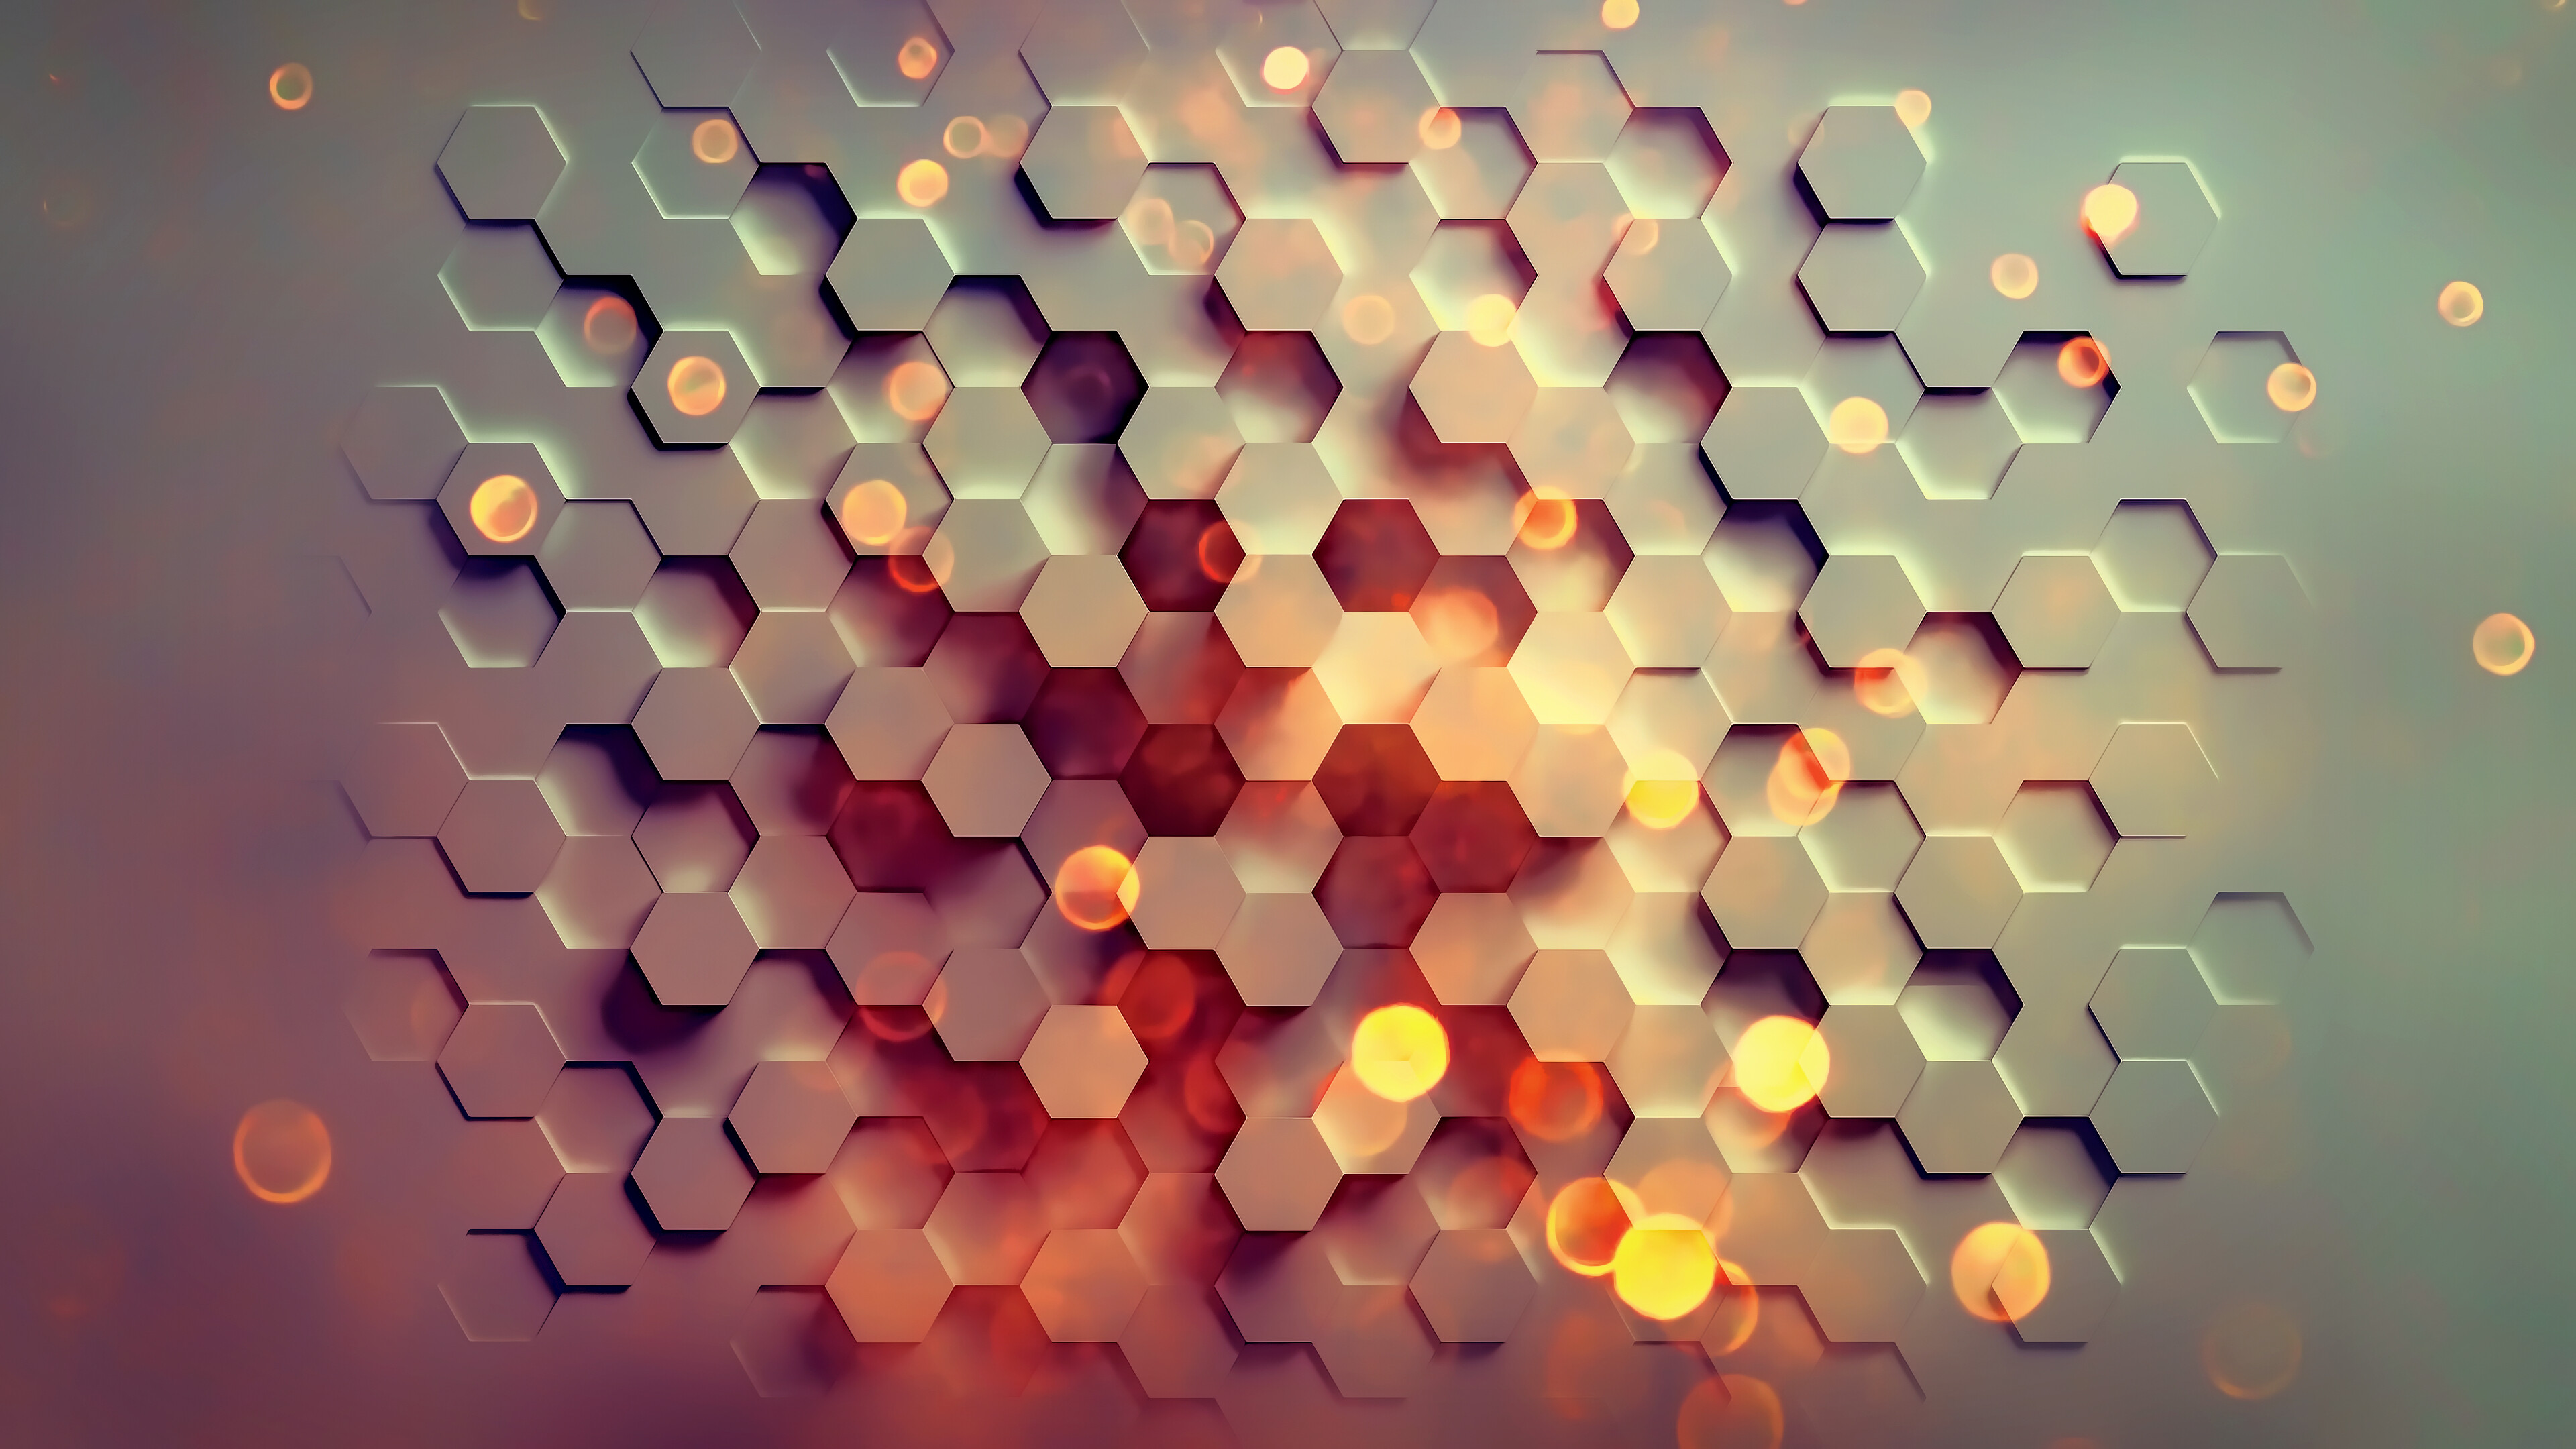 Geometric Abstract: Hexagons, Circles, Obtuse angles, Intersecting lines. 3840x2160 4K Wallpaper.